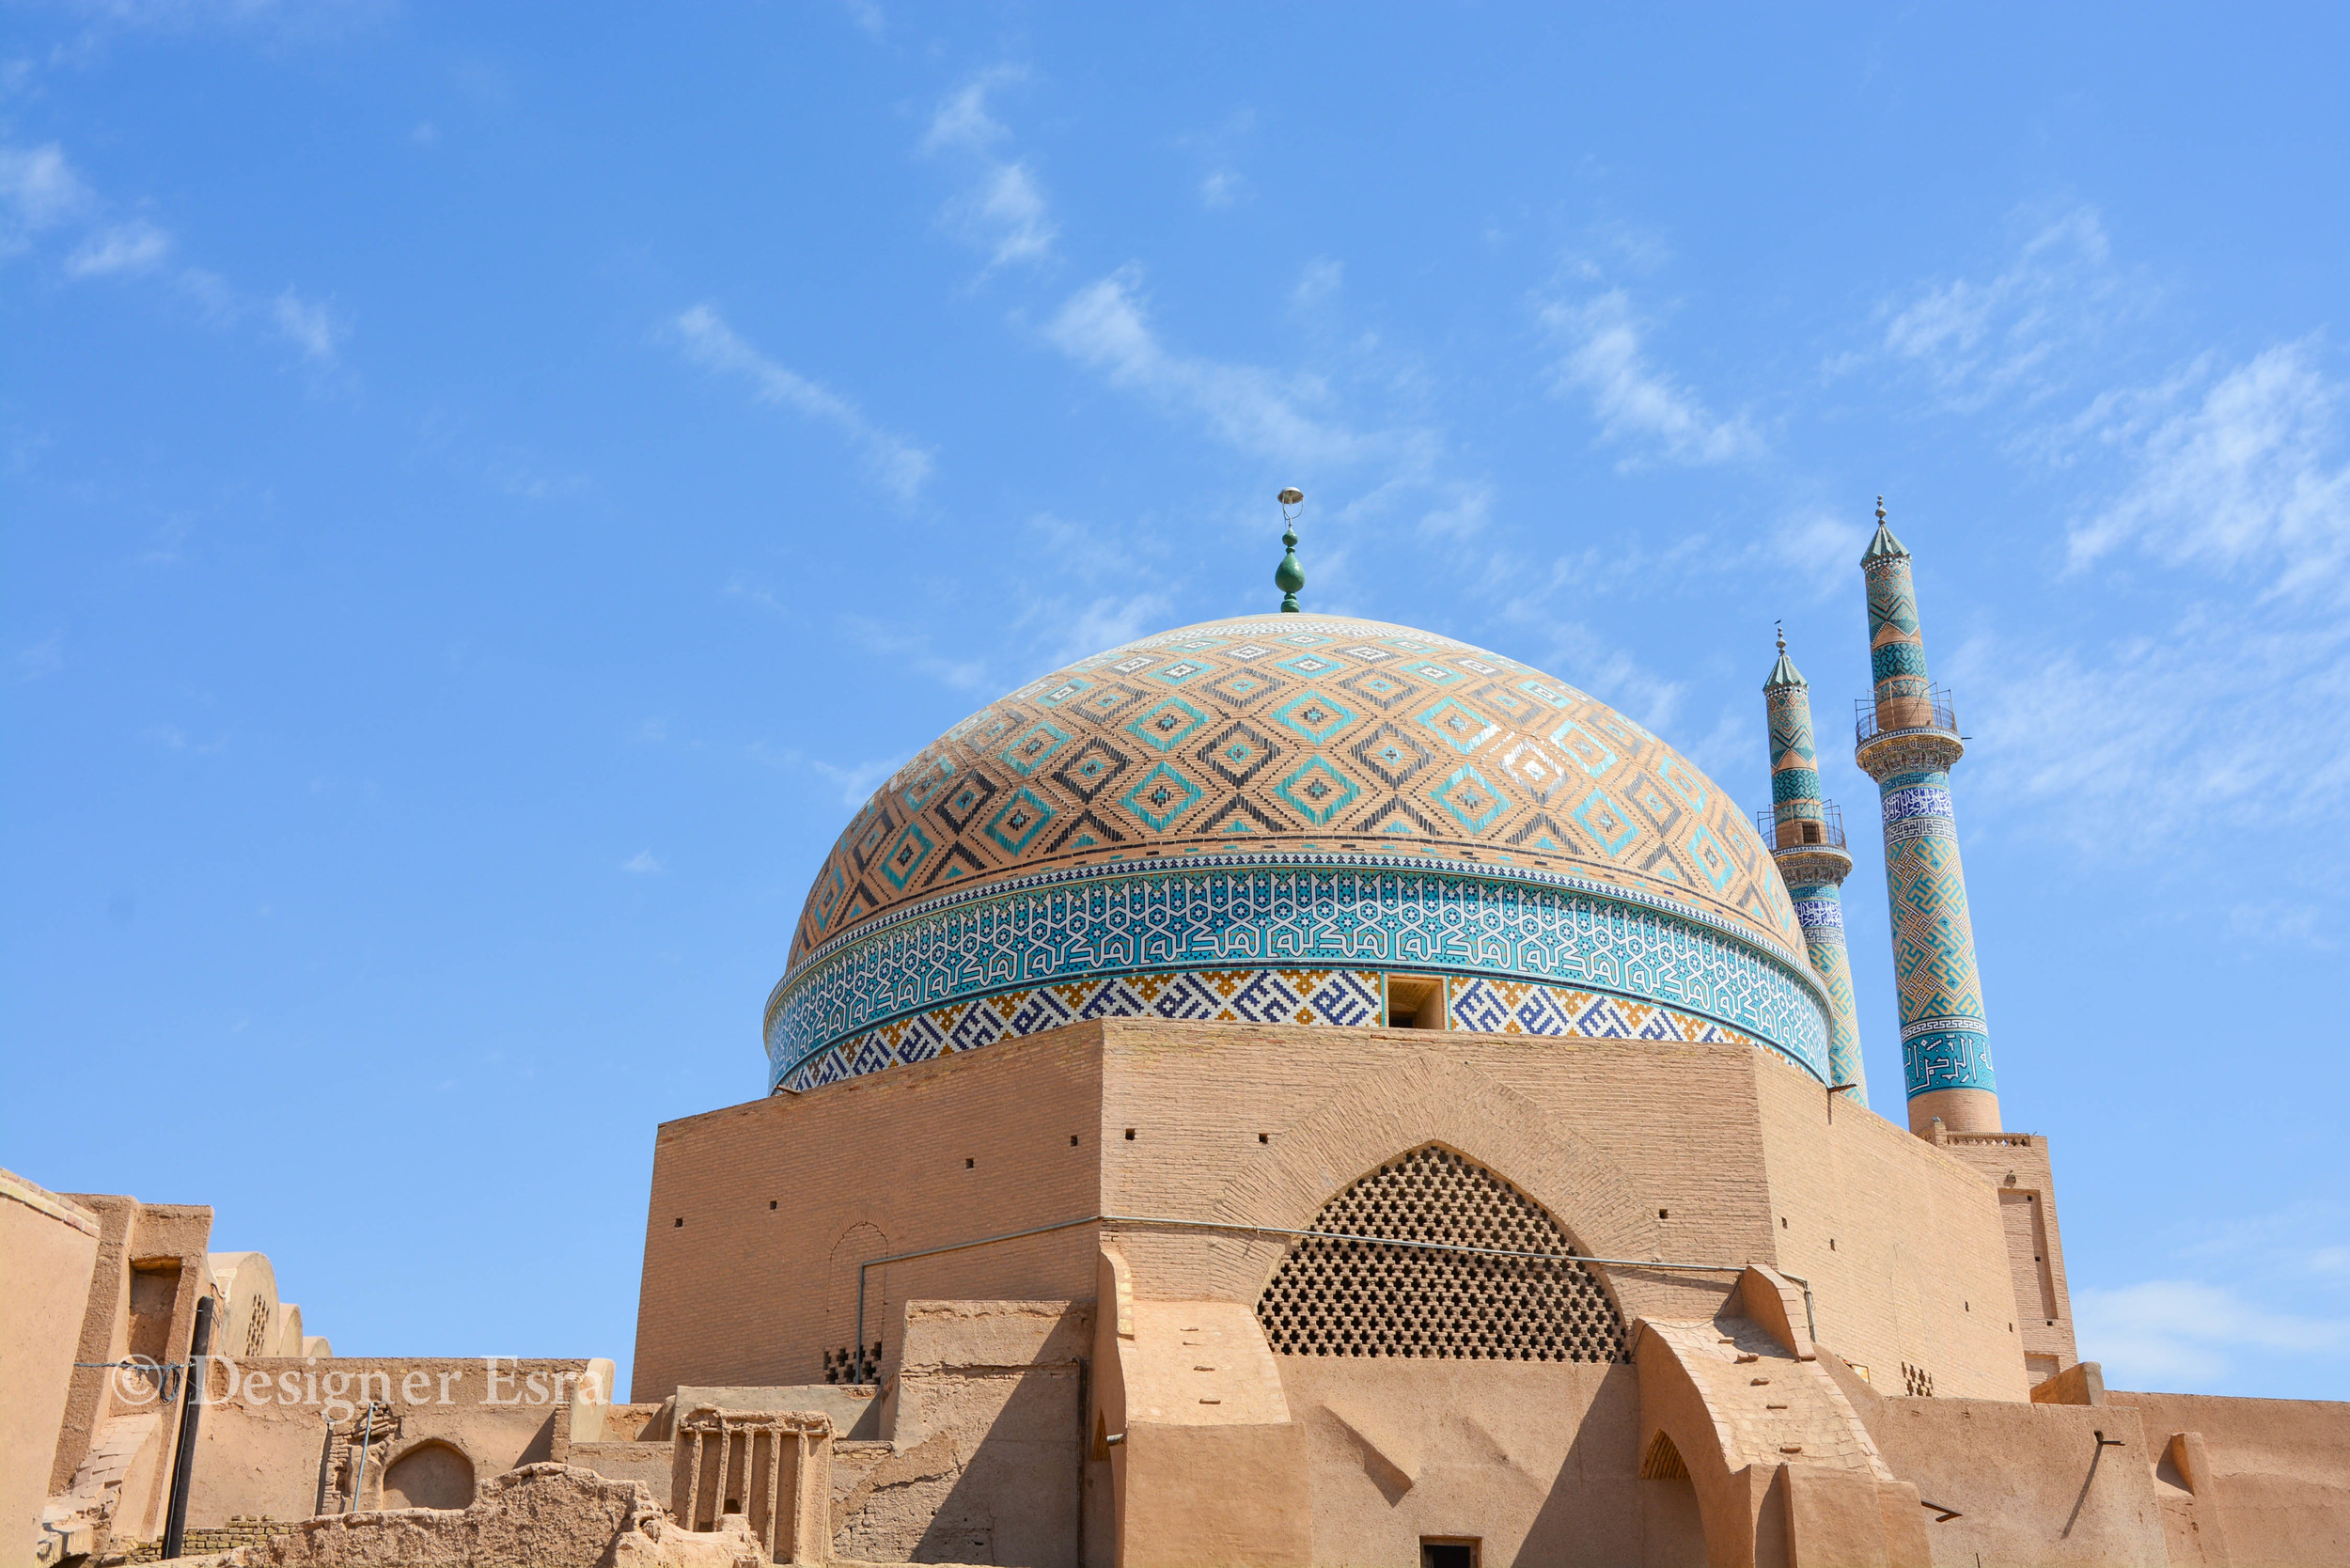 The dome of Jame'a / Friday Mosque in Yazd, Iran